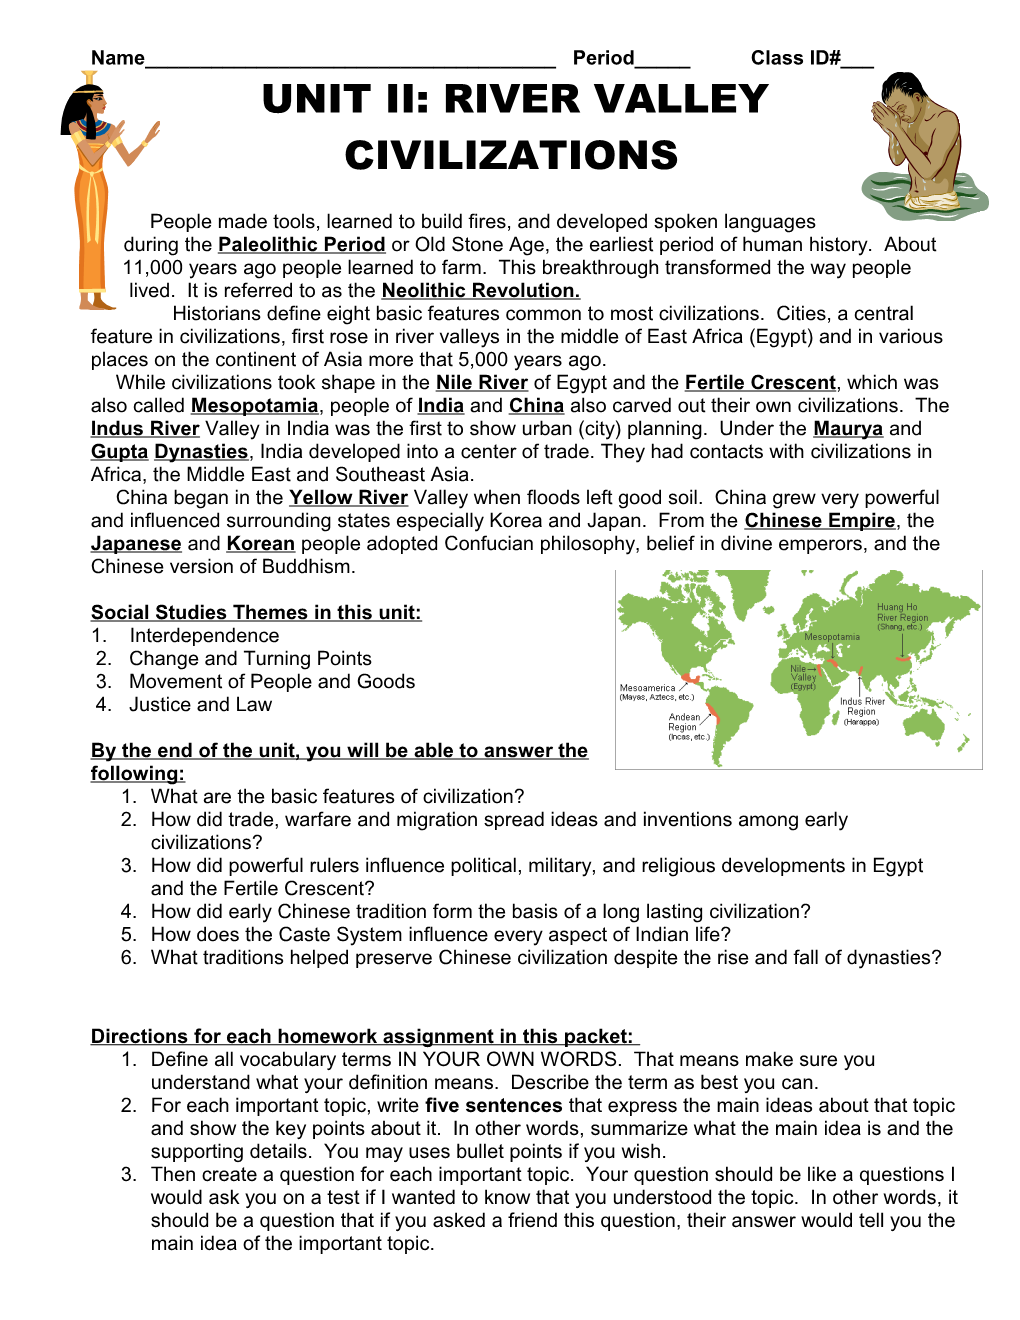 Unit I Introduction to the Pre- Civilized World - First Civilizations